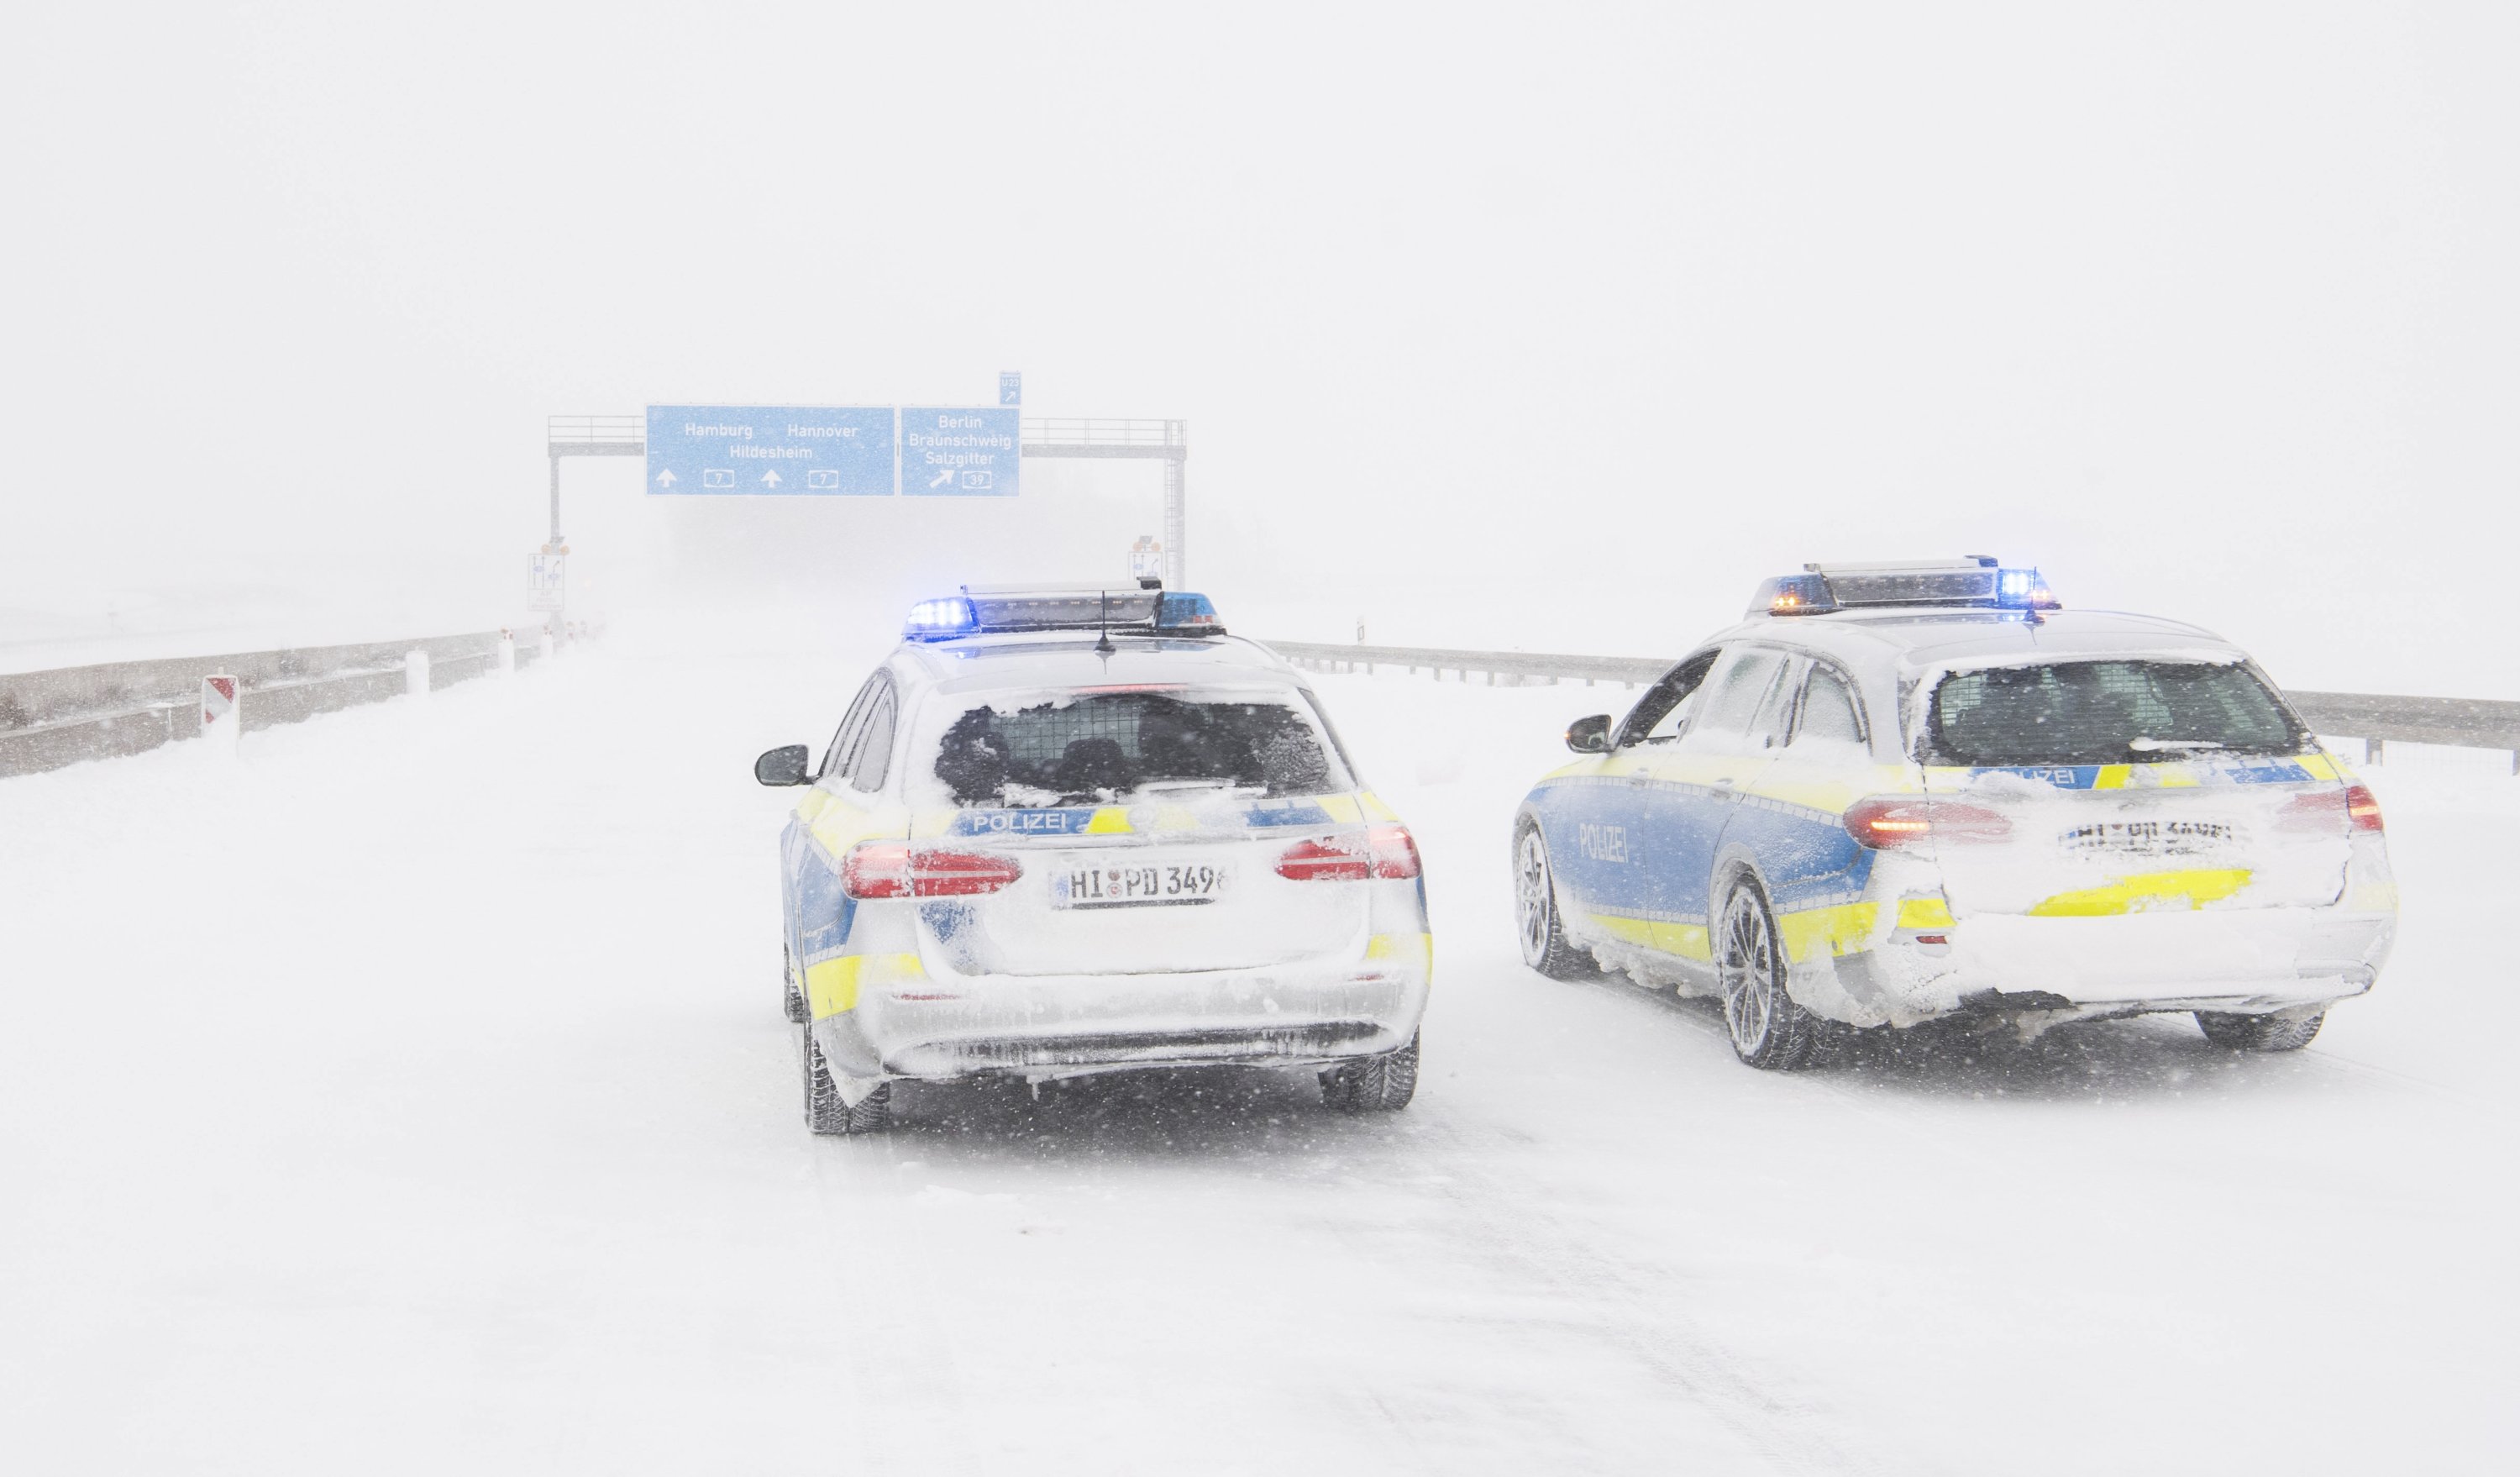 Police vehicles stand on the closed A7 motorway at the Salzgitter interchange in Bockenem, Germany, Sunday, Feb. 7, 2021. (Julian Stratenschulte/dpa via AP)